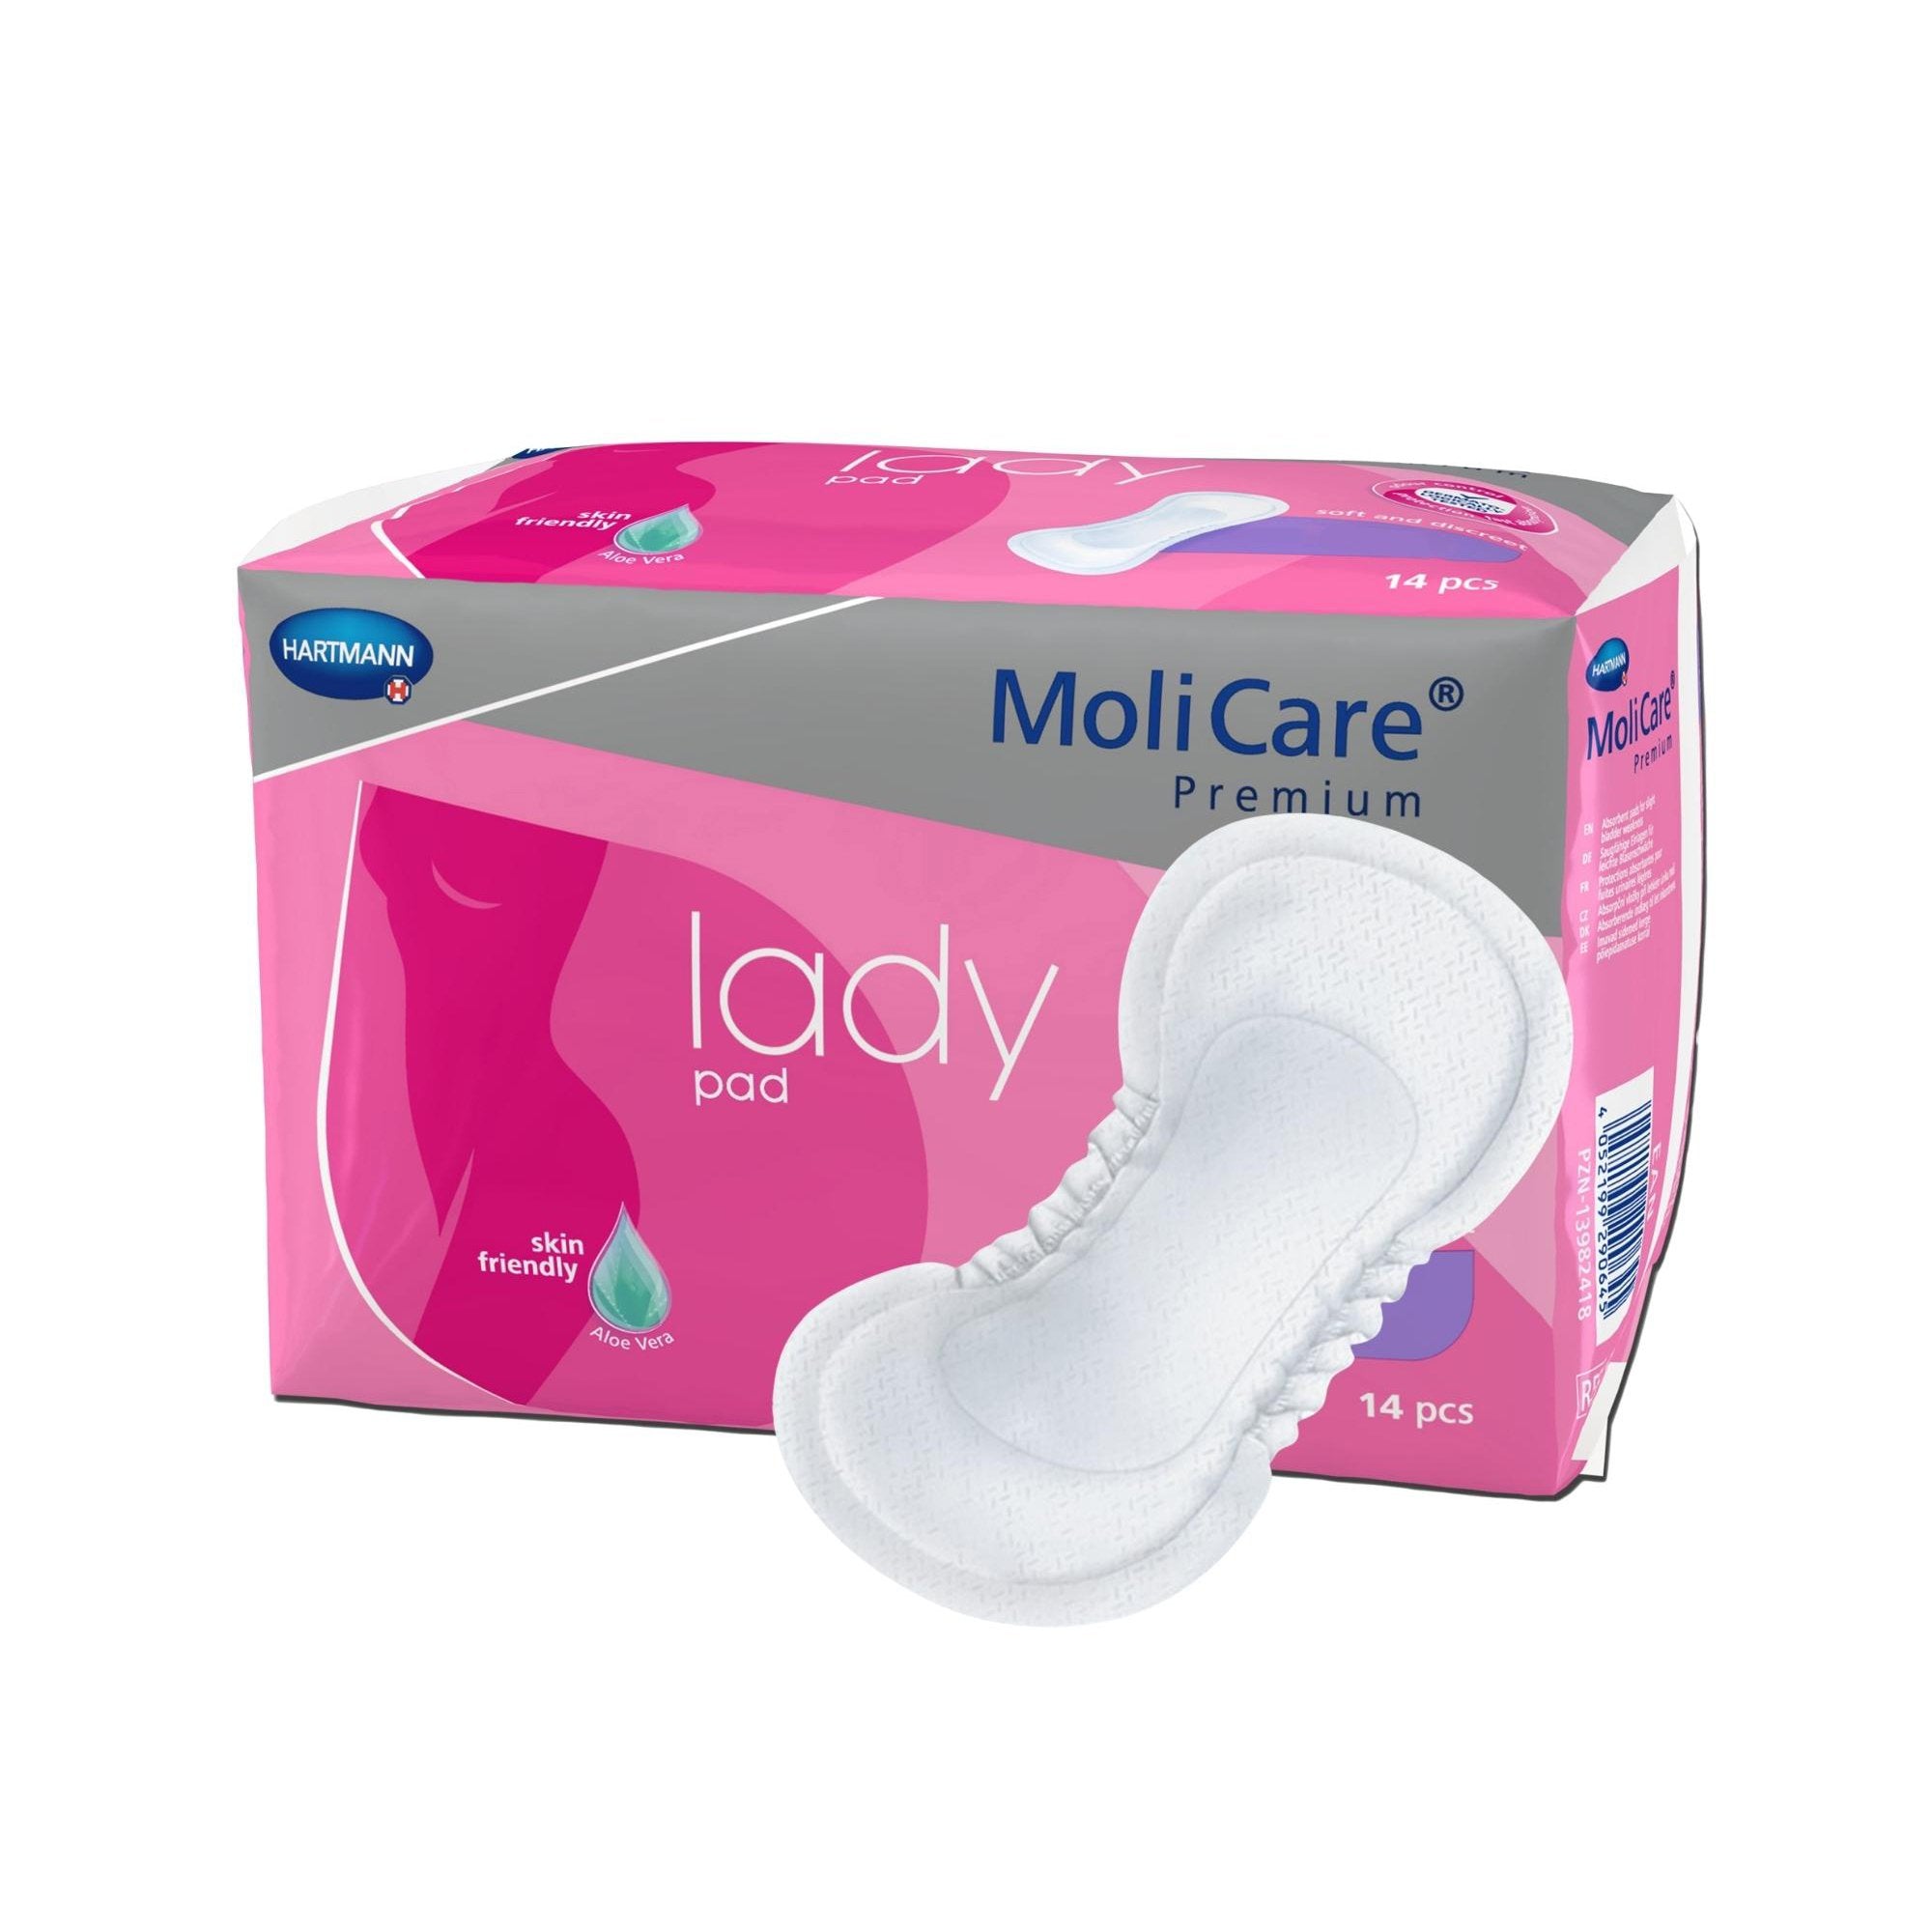 Bladder Control Pad MoliCare® Premium Lady Pads 3-1/2 X 10-1/2 Inch Light Absorbency Polymer Core One Size Fits Most